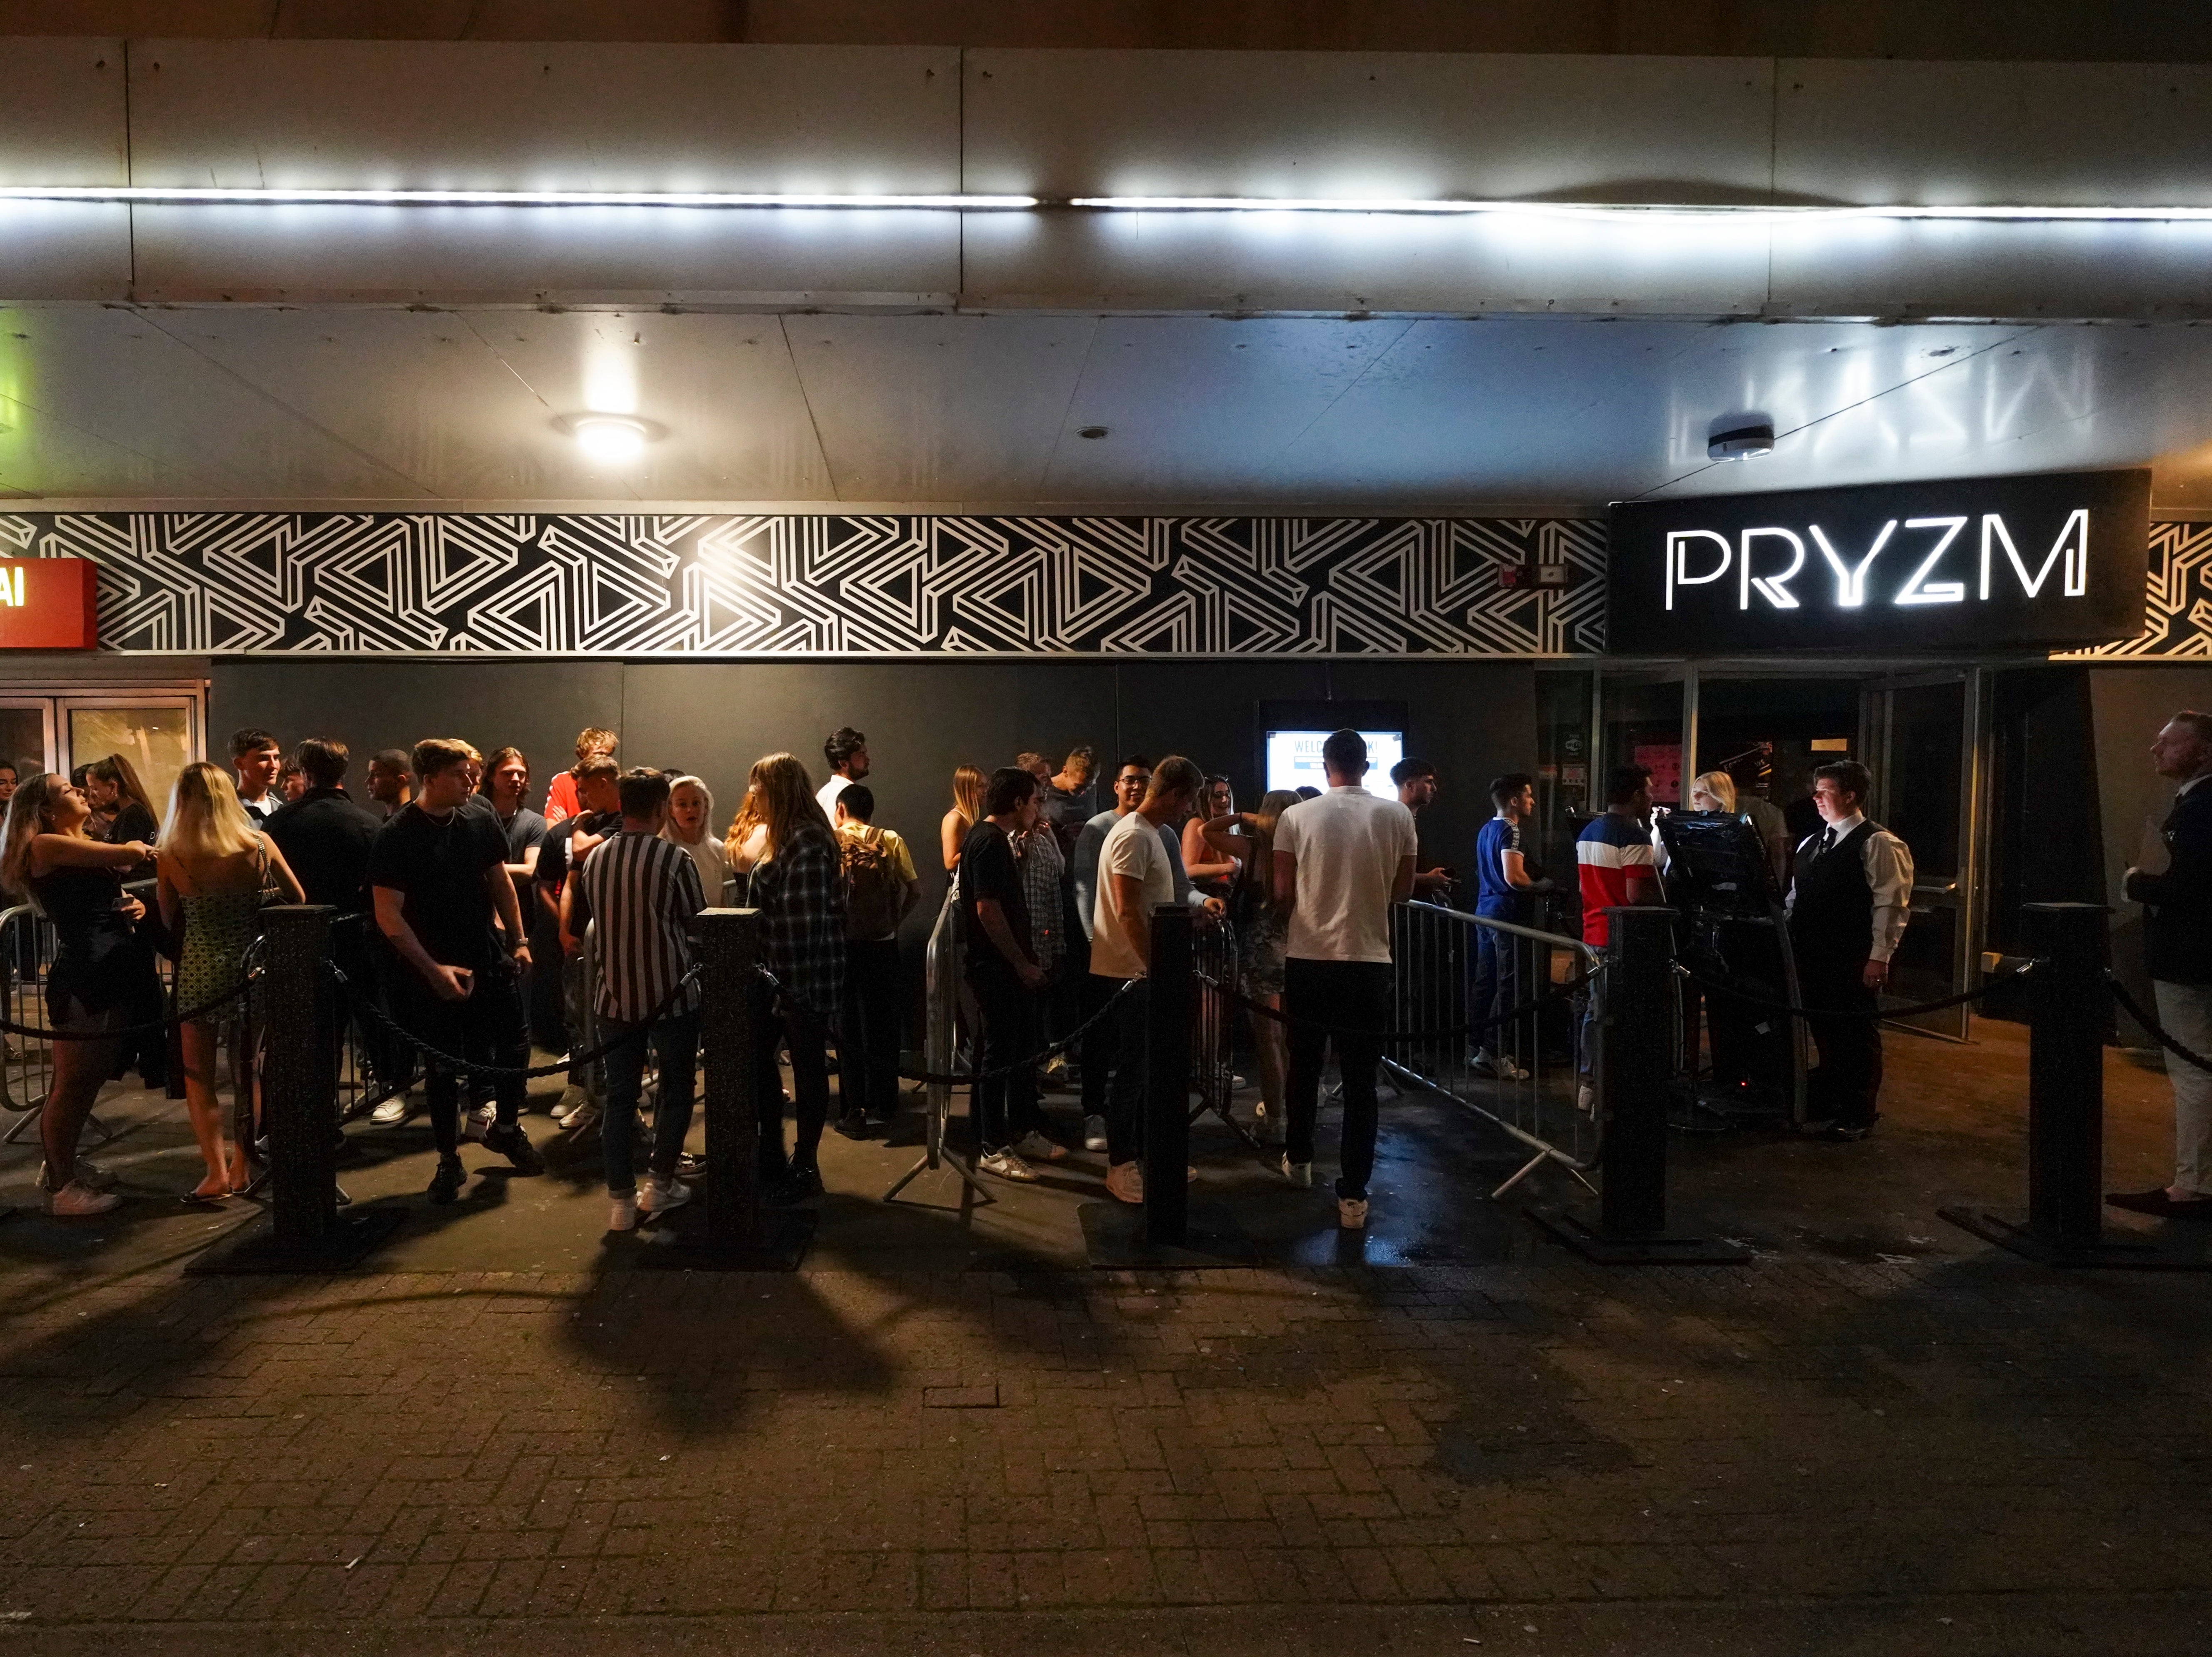 The owner of Pryzm clubs says safety measures will be stepped up in response to spiking concerns